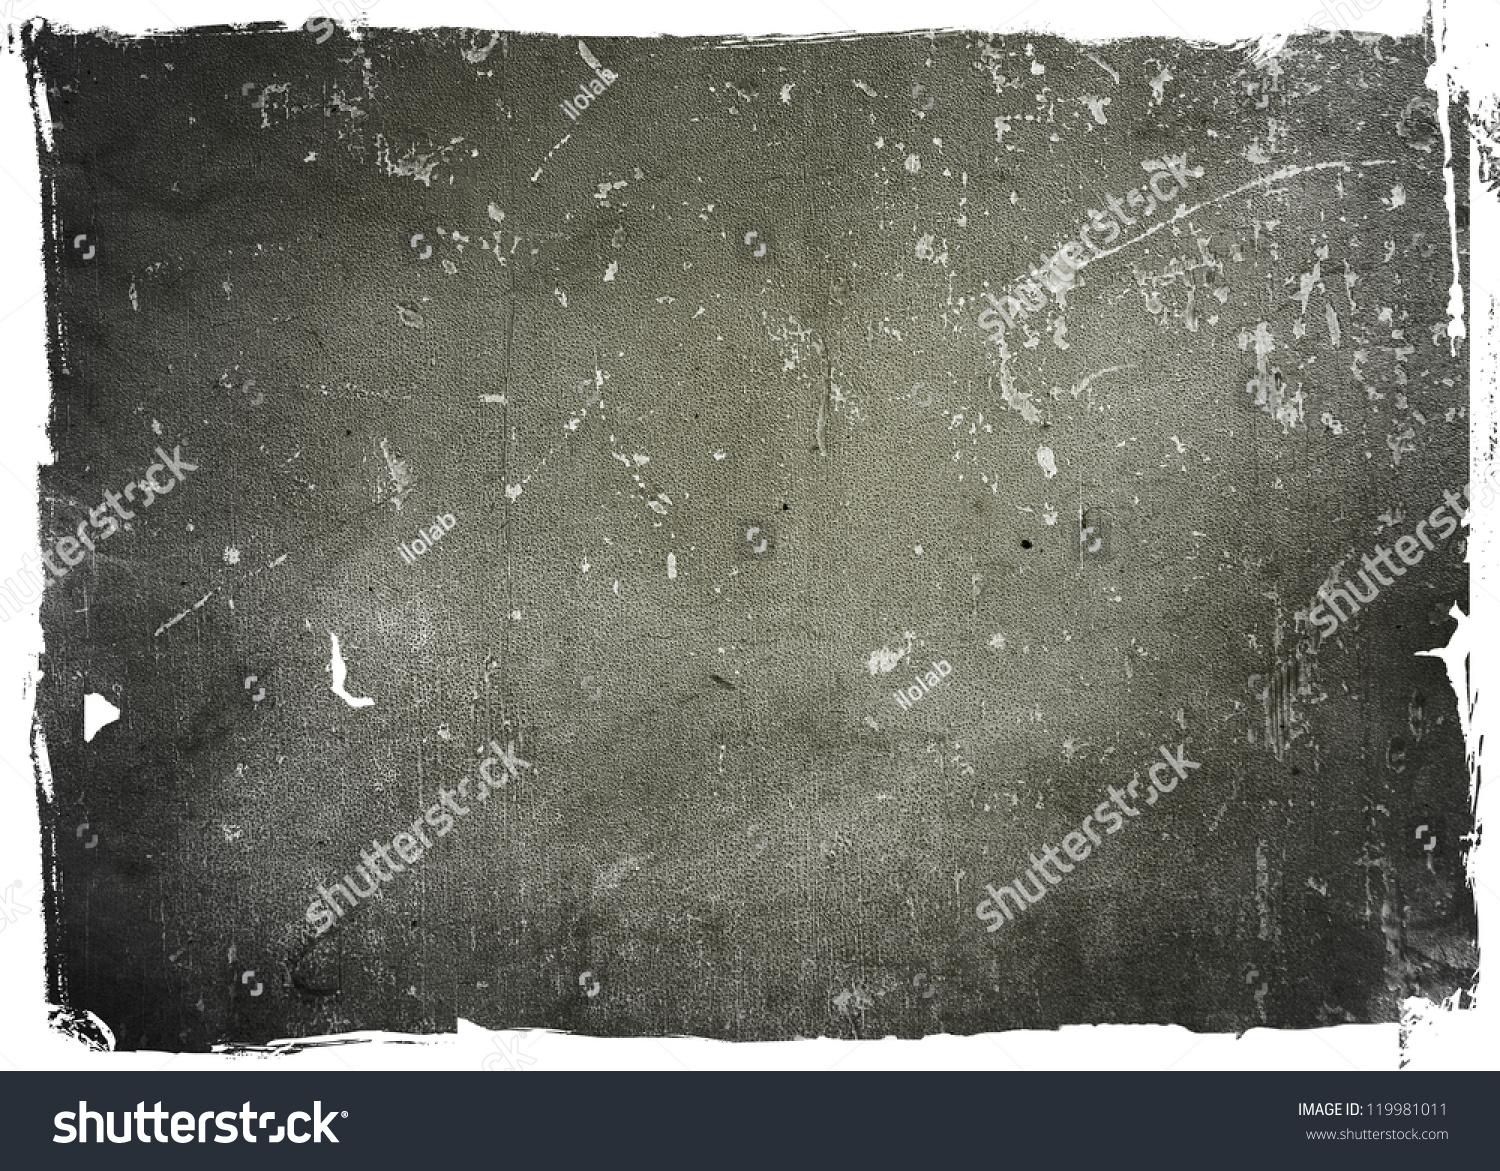 highly Detailed textured grunge background frame with space for your projects #119981011